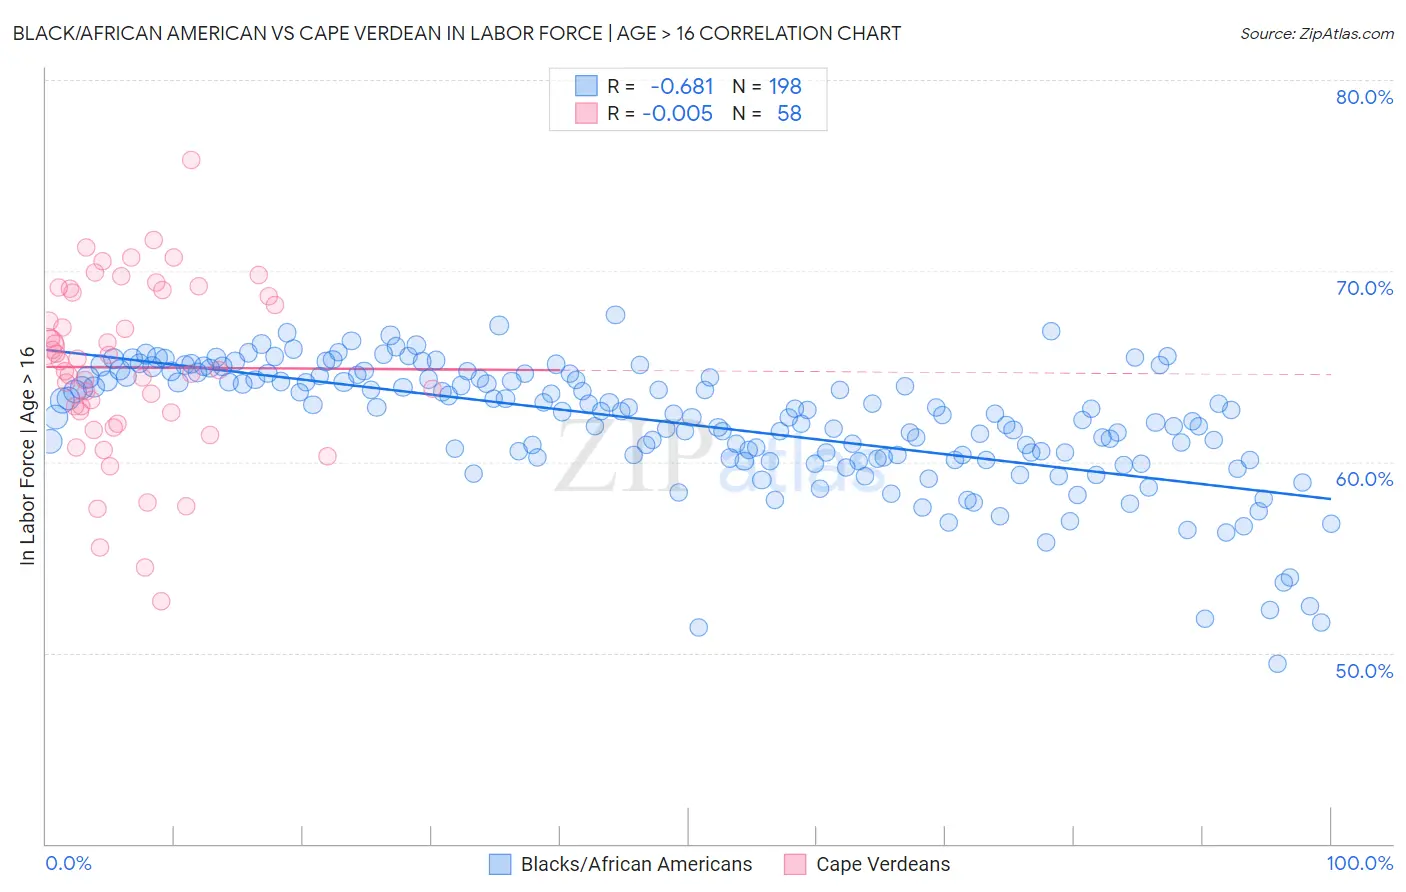 Black/African American vs Cape Verdean In Labor Force | Age > 16